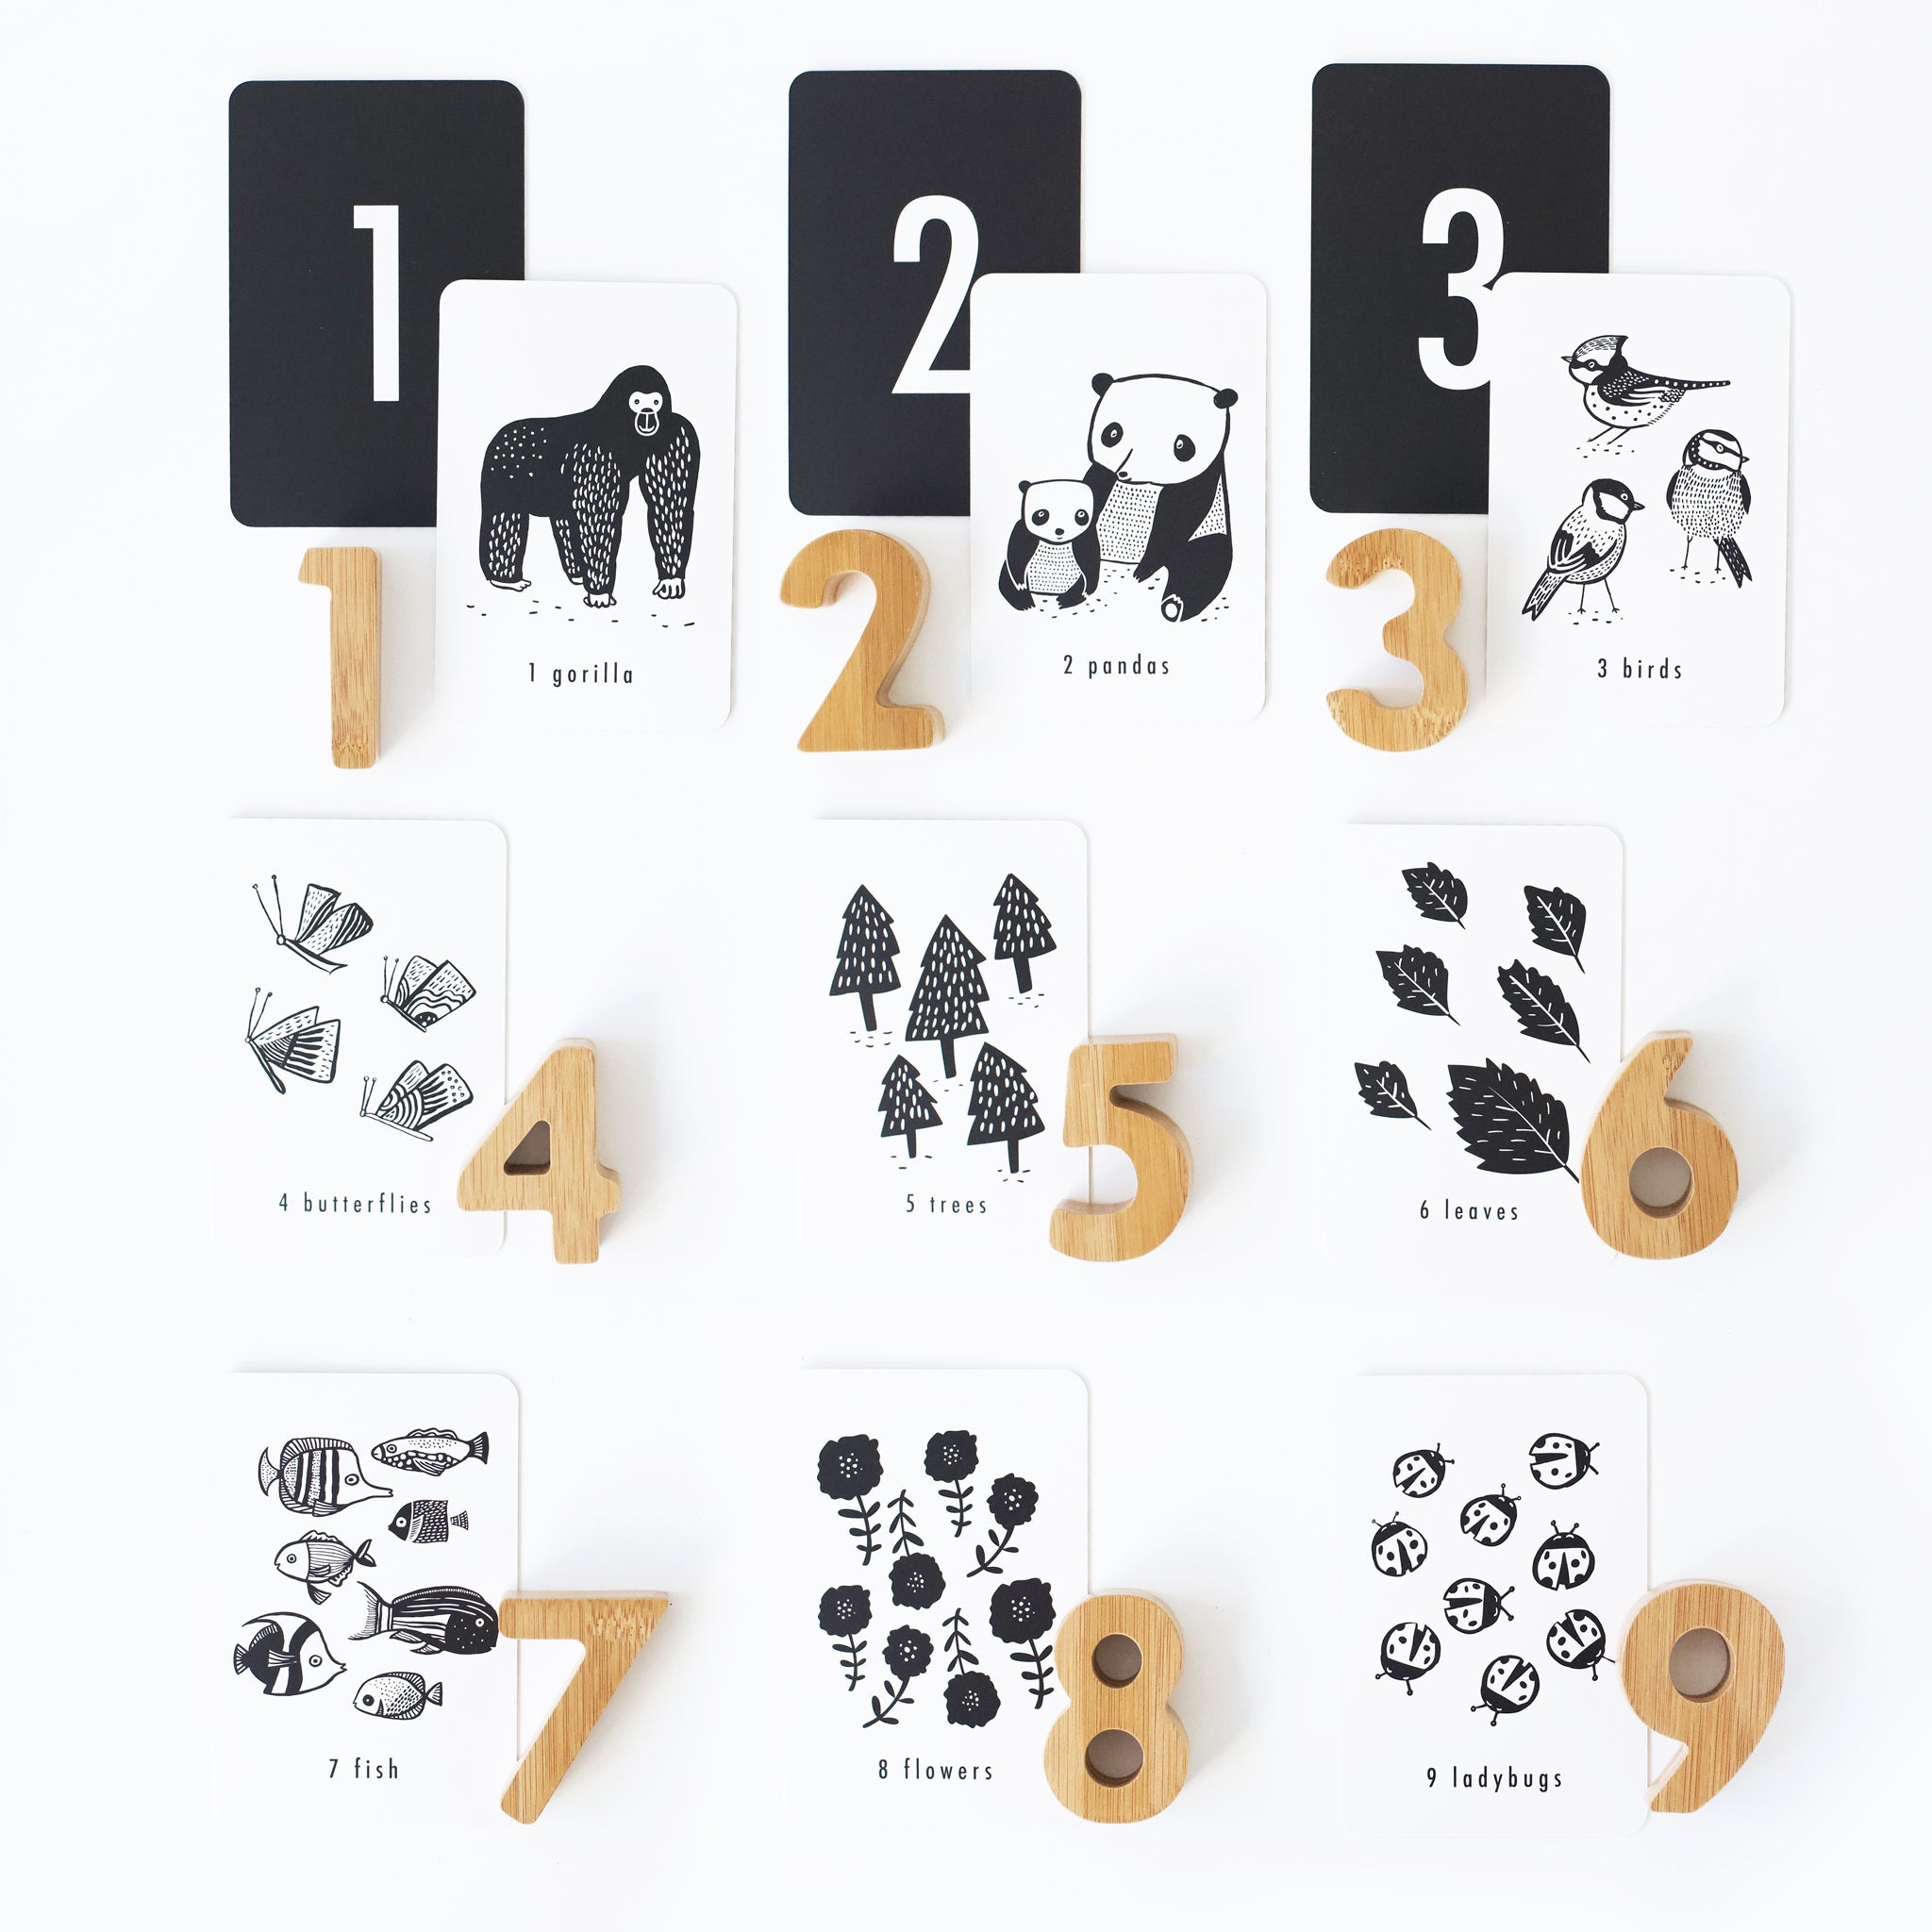 nature-number-cards-and-number-blocks-learn-to-count-for-kids_fd1bbfc5-a31e-4947-8657-2f2de362d0ad.jpg